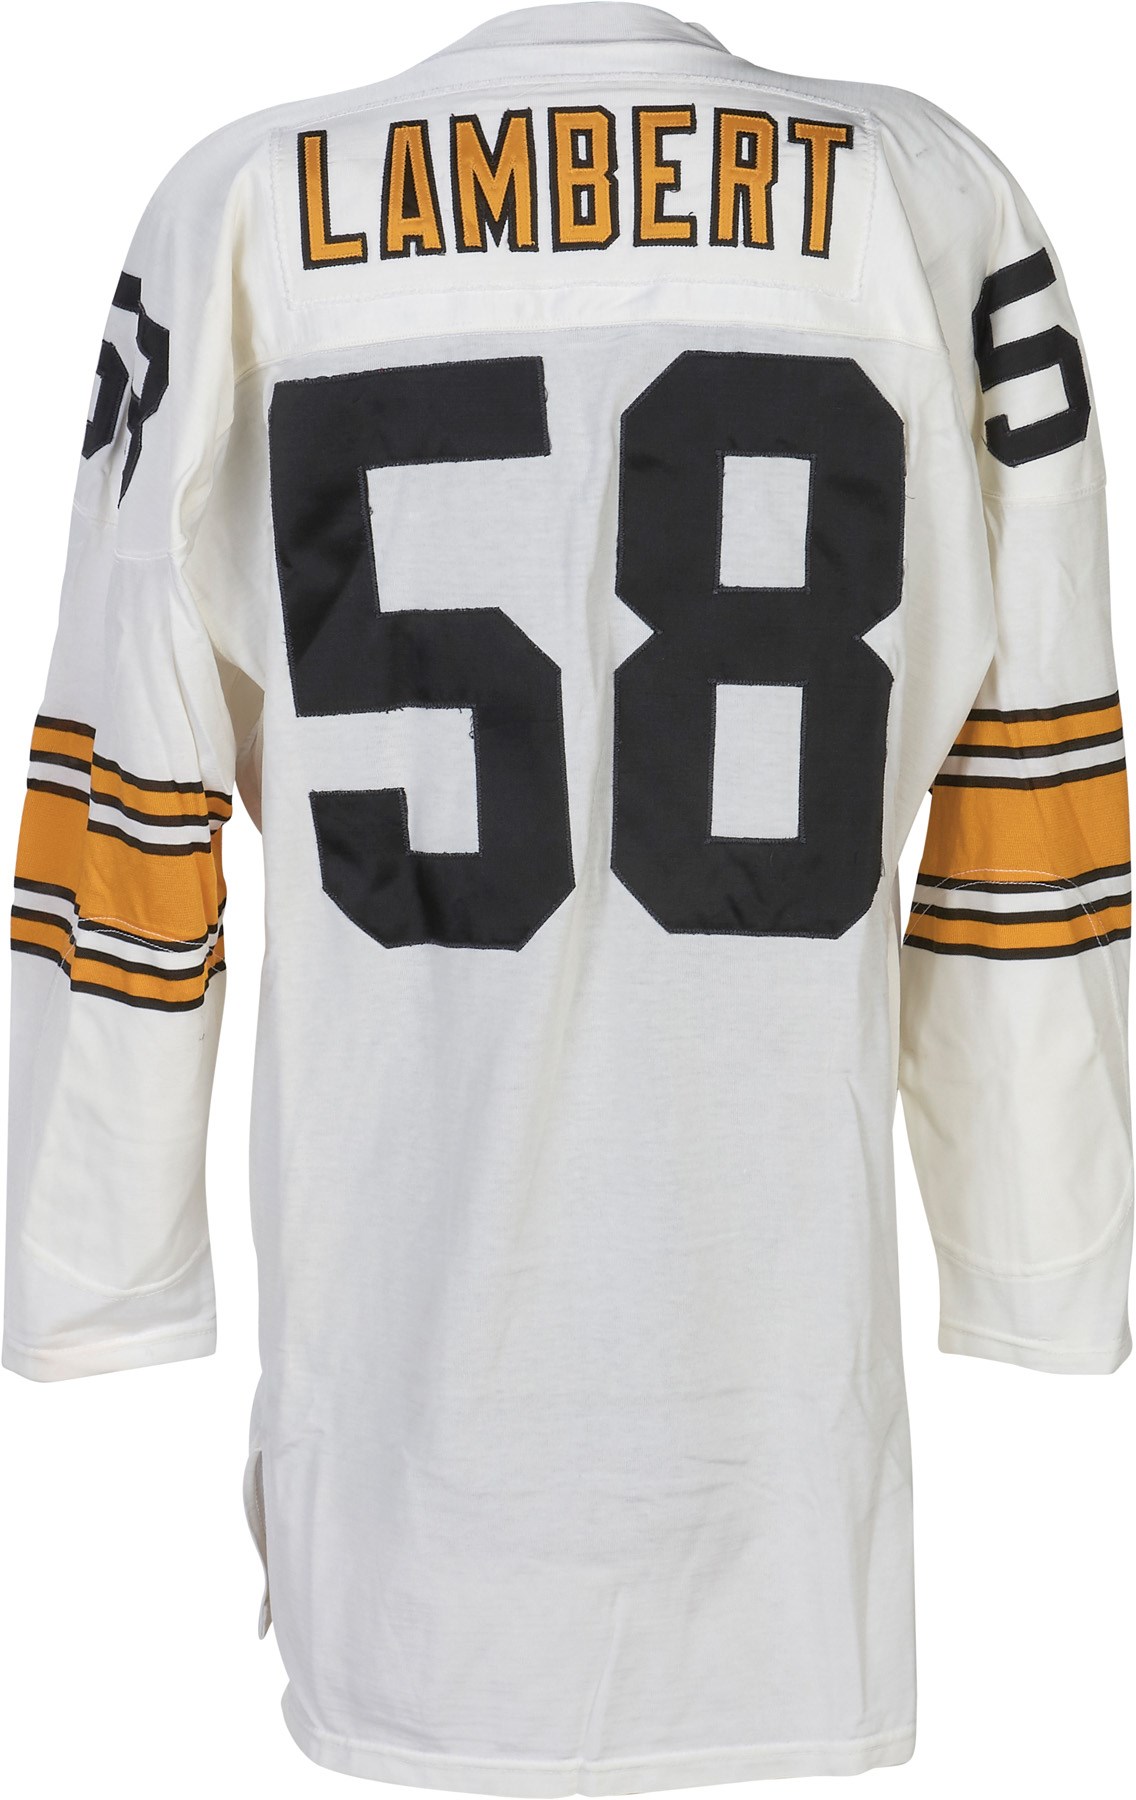 The Pittsburgh Steelers Game Worn Jersey Archive - 1984 Jack Lambert Pittsburgh Steelers Game Worn Jersey (Photo-Matched)